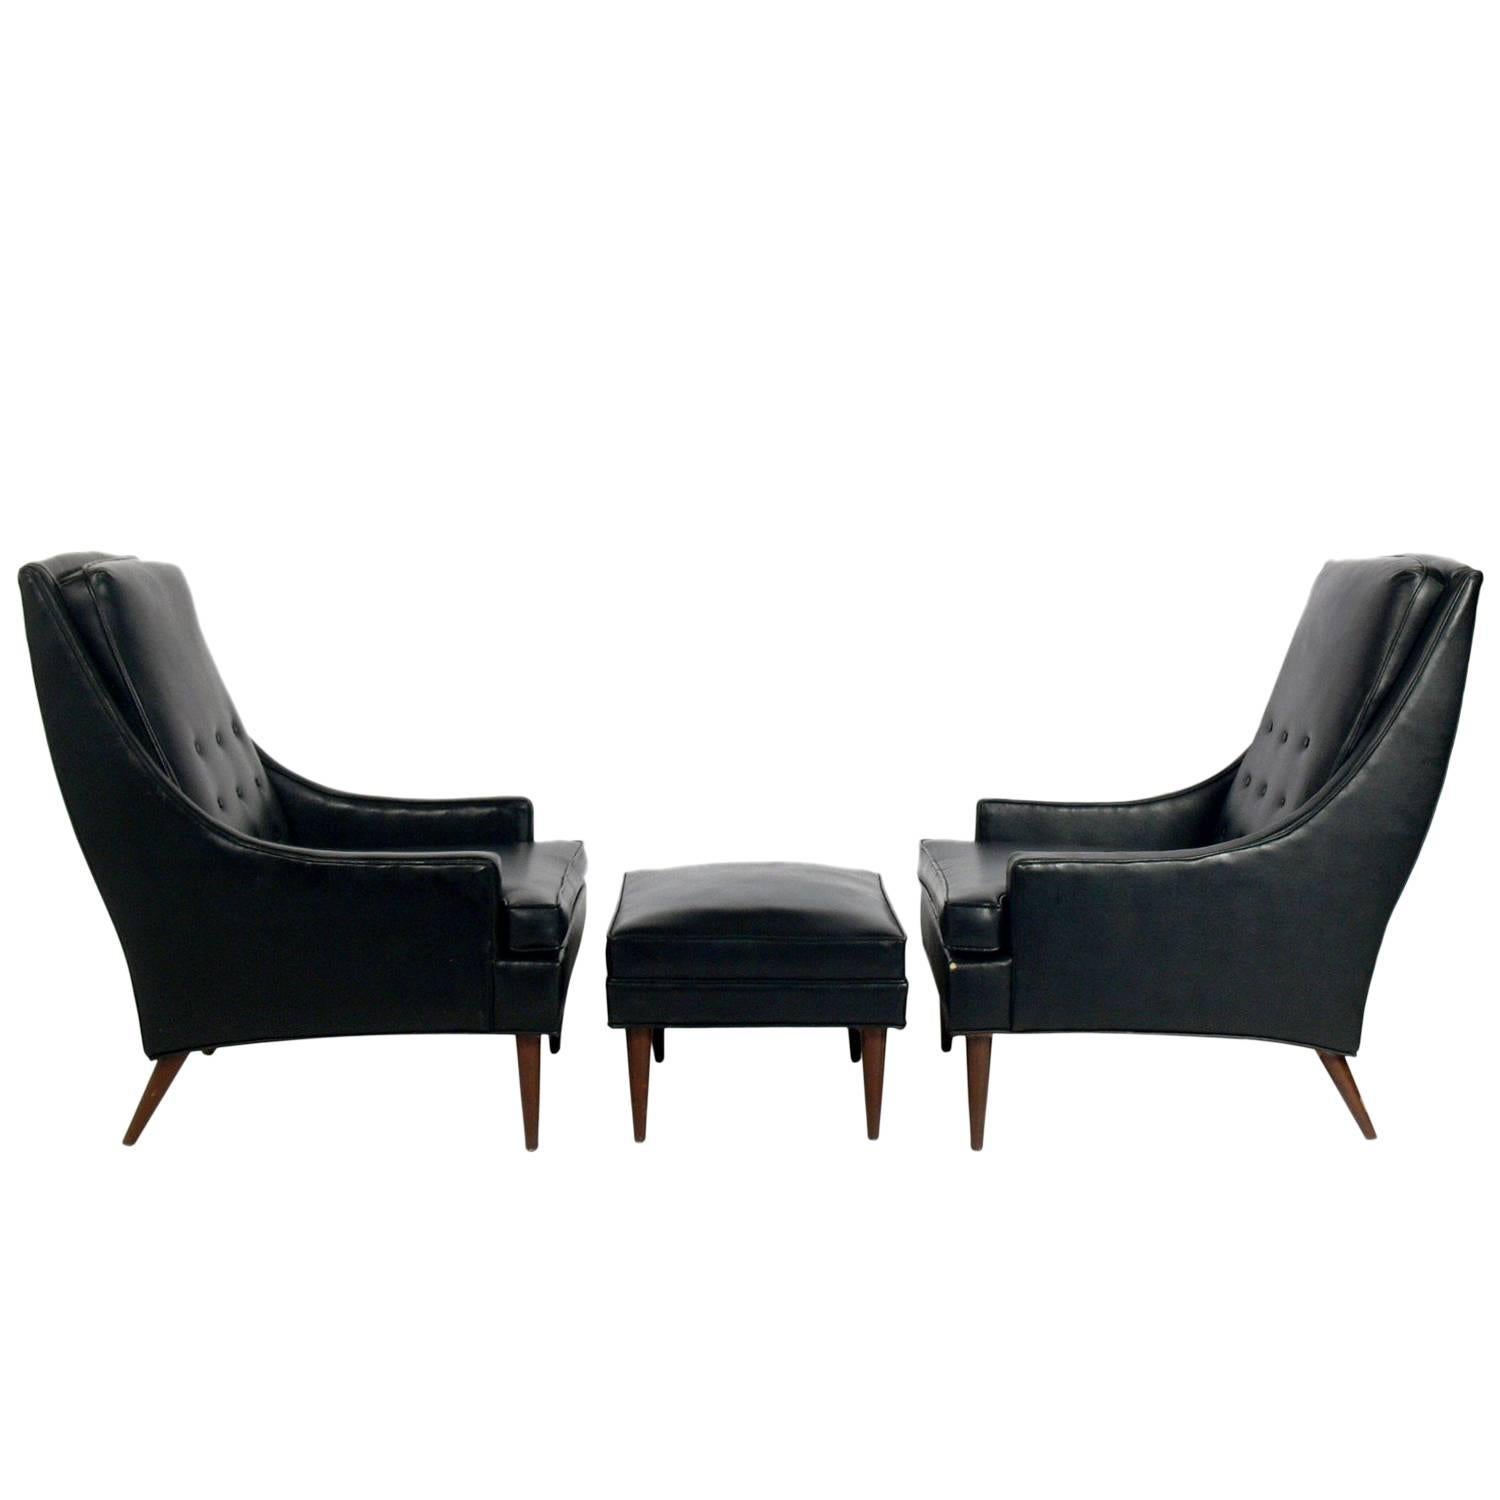 Pair of Mid-Century Modern Lounge Chairs and Ottoman Attributed to Milo Baughman